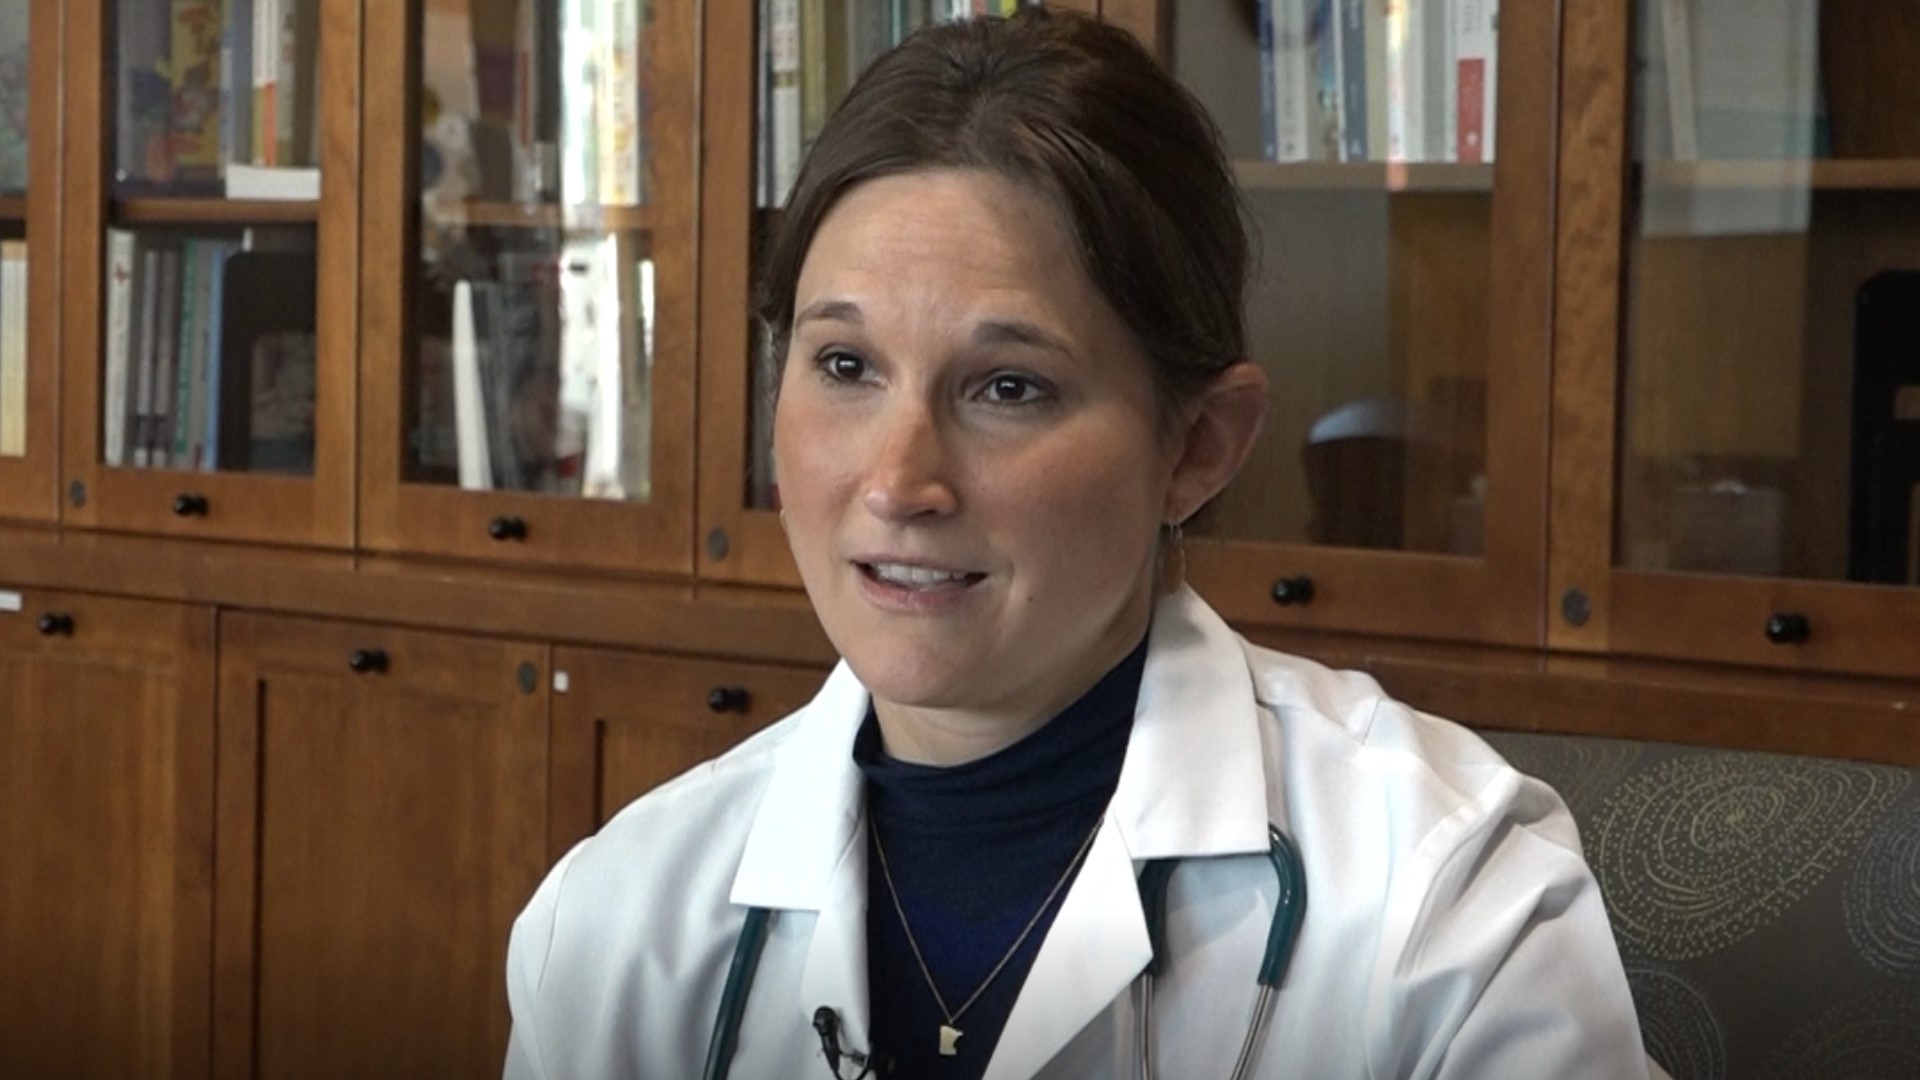 Dr. Jen Pratt is living out her childhood dream as a pediatrician at the same hospital she sought treatment from over two decades earlier.